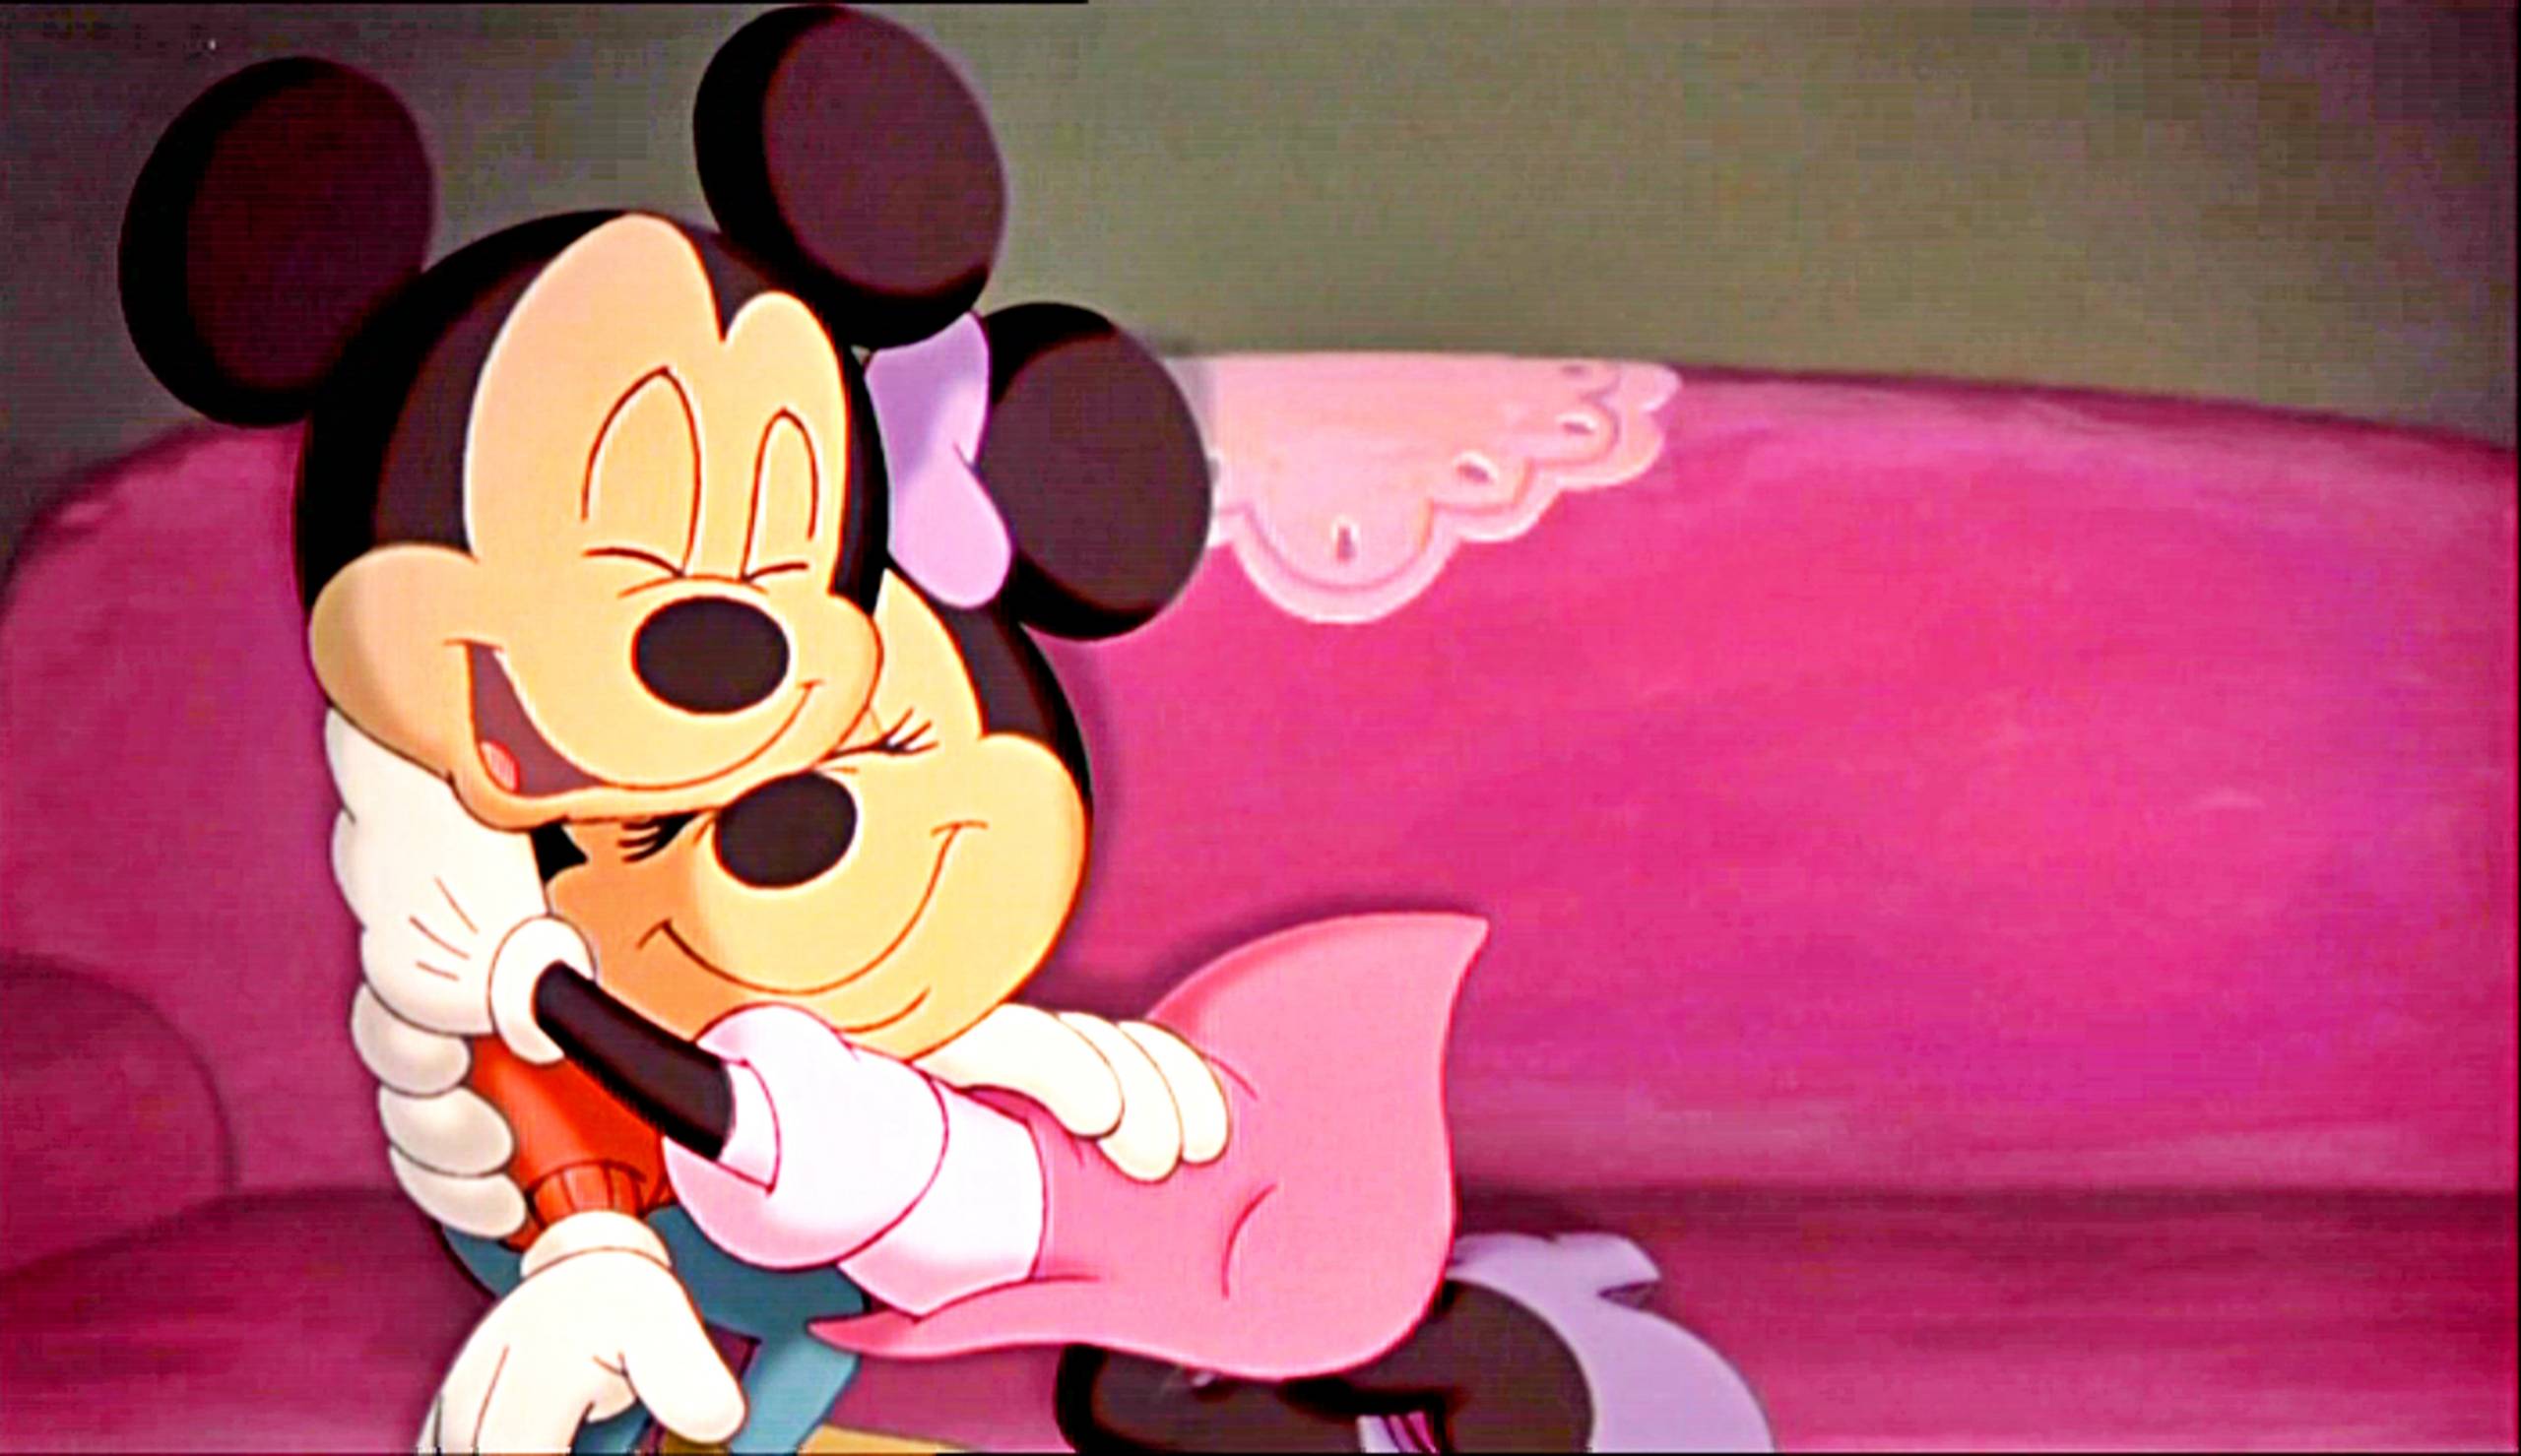 Mickey And Minnie Mouse Hugs Wallpaper Free For Android. wolcartoon